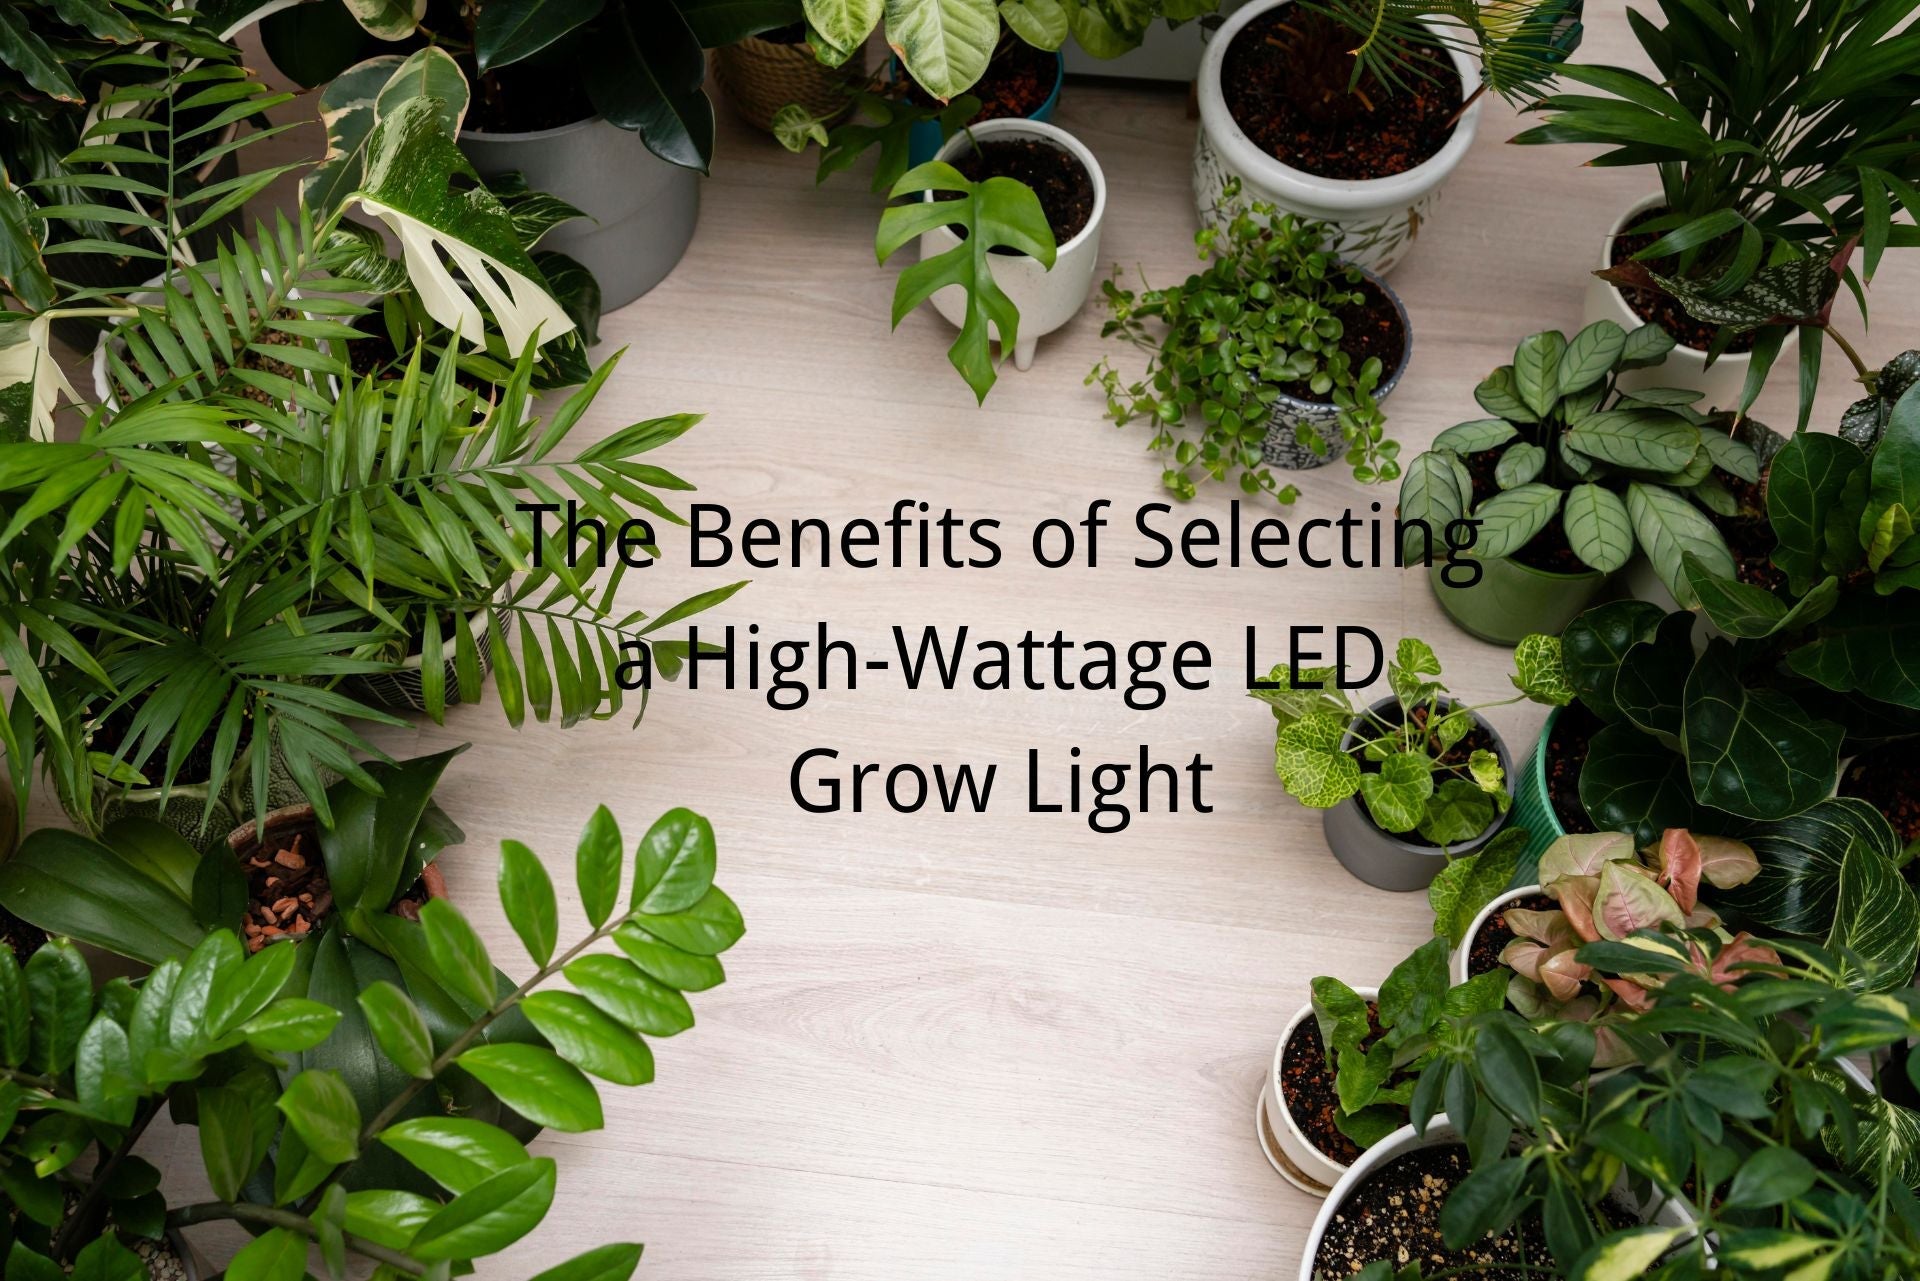 The Benefits of Selecting a High-Wattage LED Grow Light